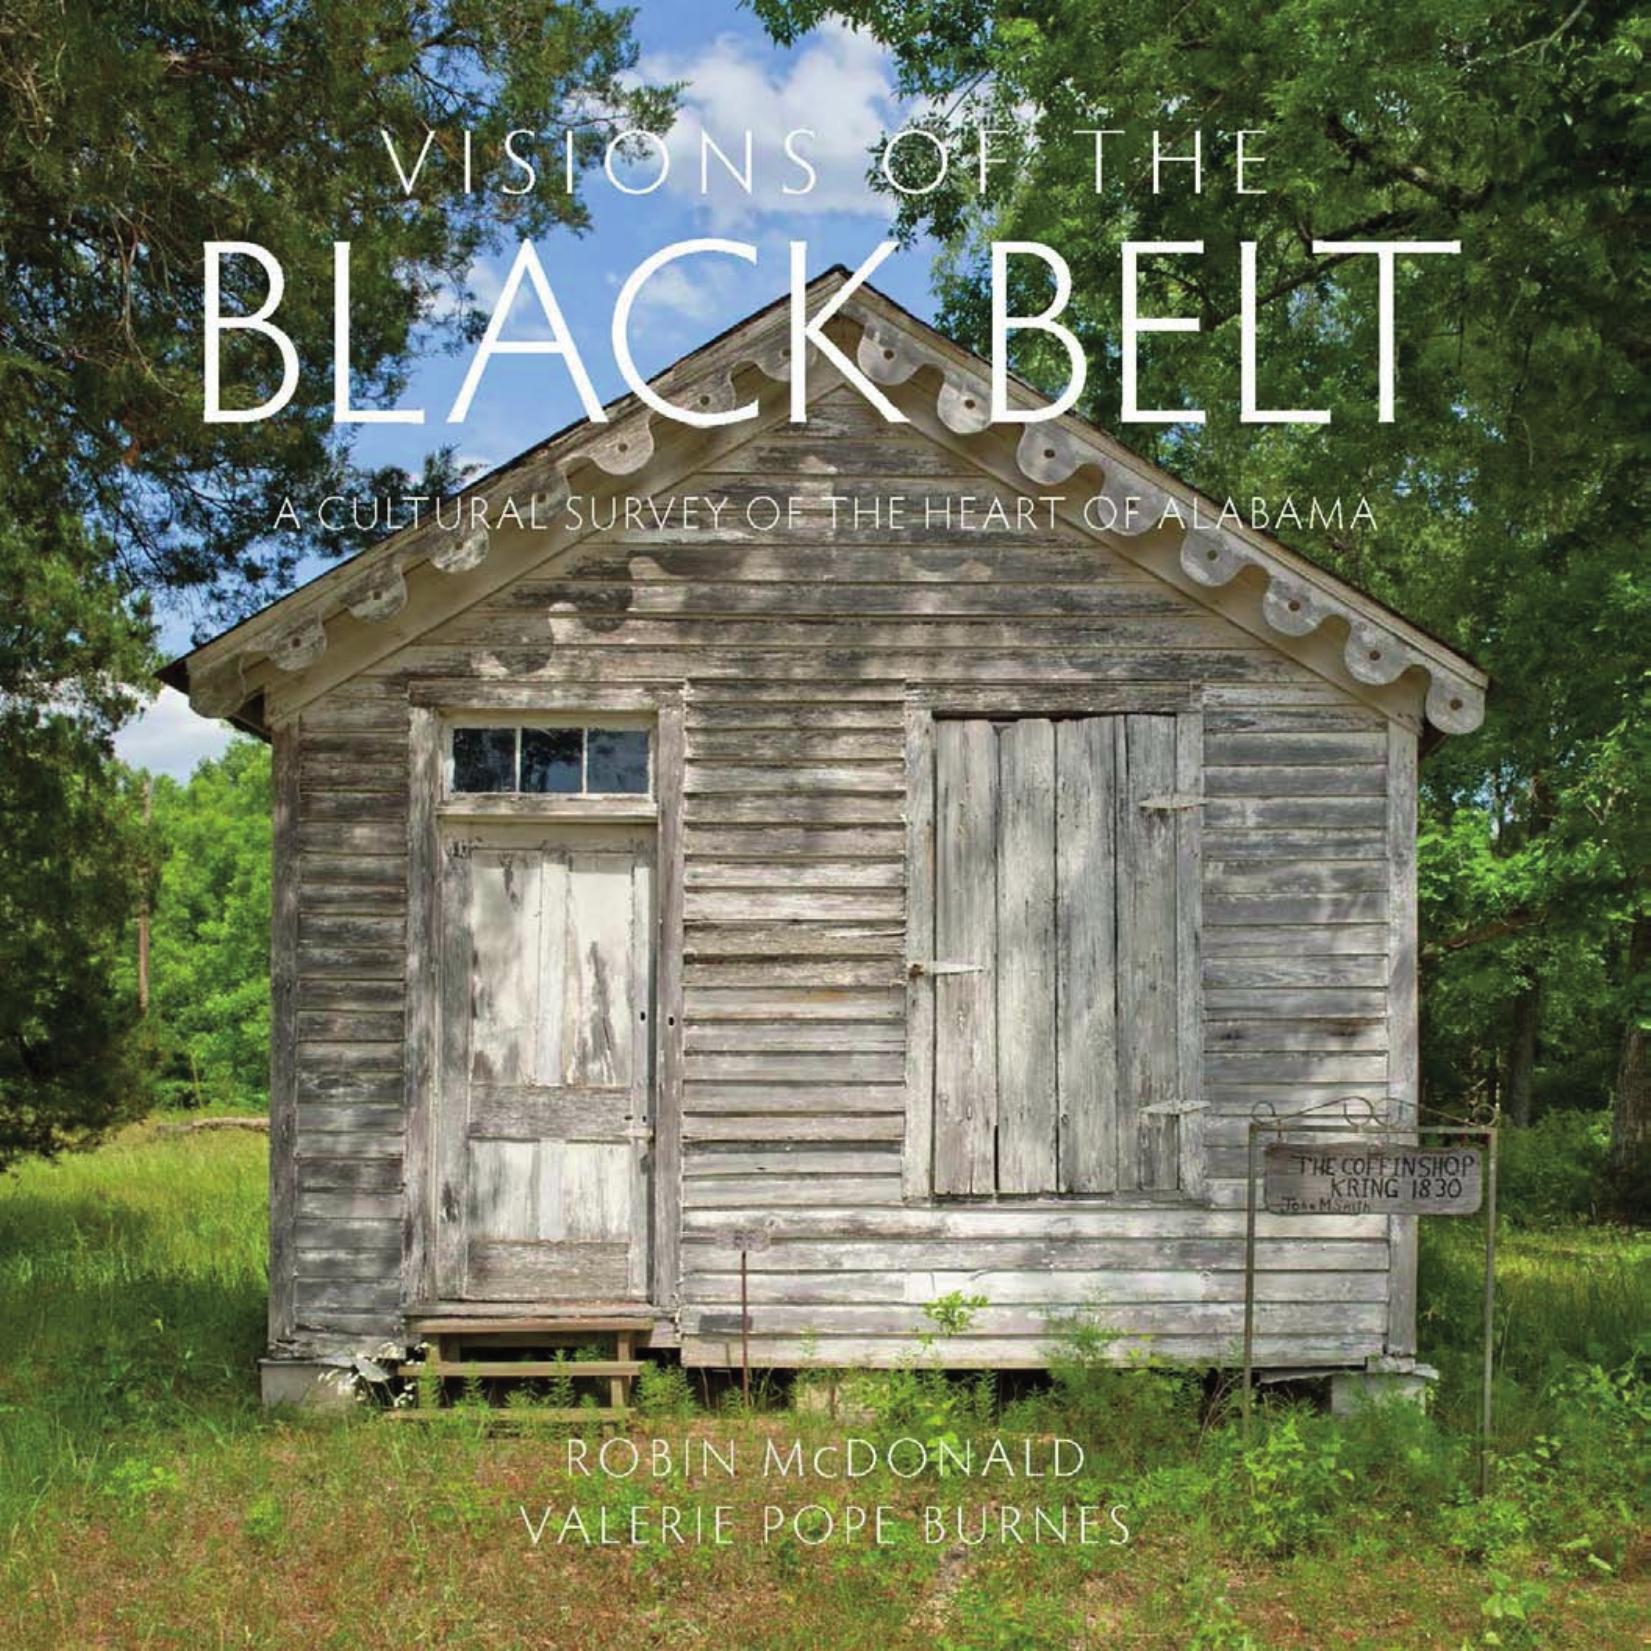 Visions of the Black Belt: A Cultural Survey of the Heart of Alabama by Robin McDonald; Valerie Pope Burnes